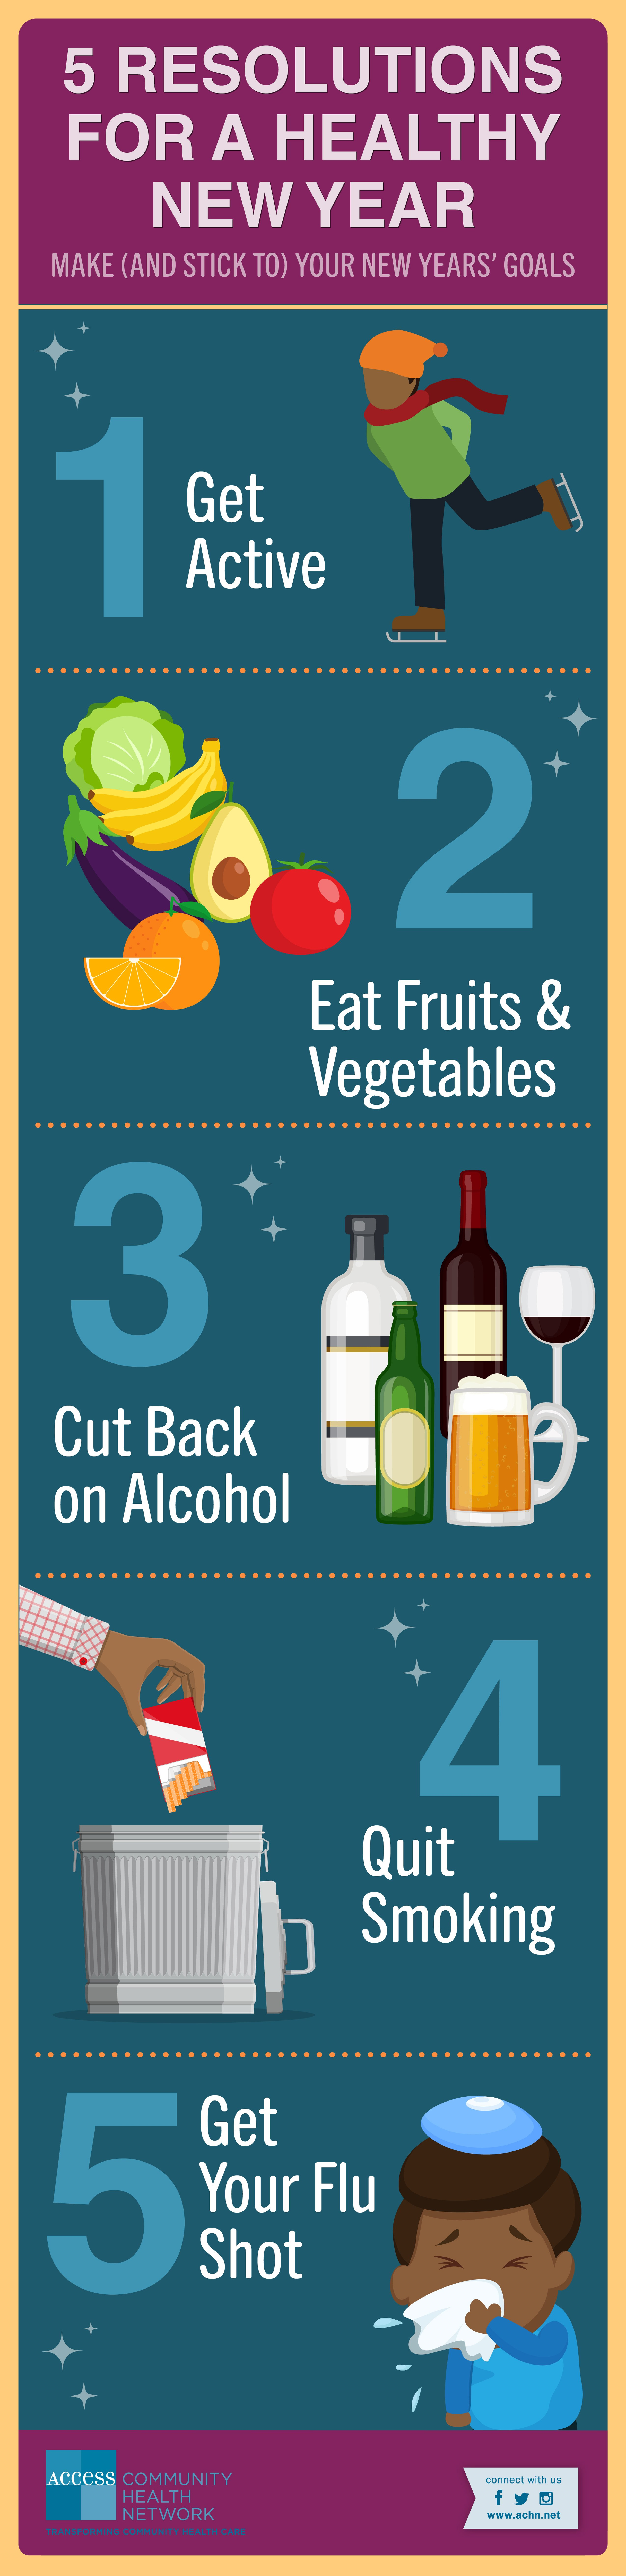 5 resolutions for a healthy new year infographic